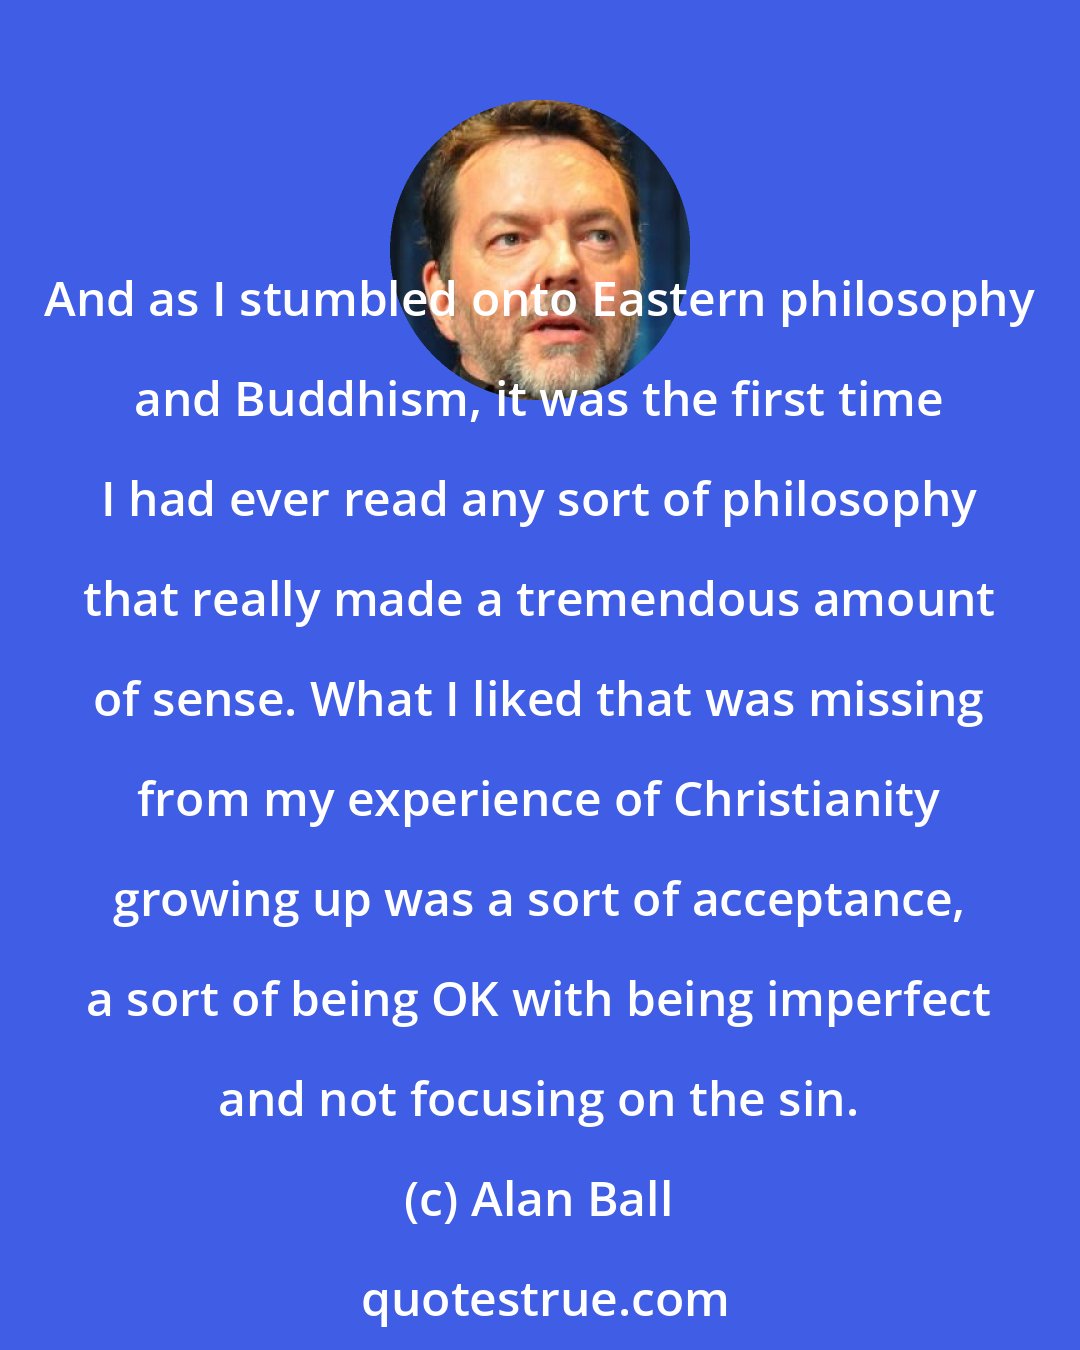 Alan Ball: And as I stumbled onto Eastern philosophy and Buddhism, it was the first time I had ever read any sort of philosophy that really made a tremendous amount of sense. What I liked that was missing from my experience of Christianity growing up was a sort of acceptance, a sort of being OK with being imperfect and not focusing on the sin.